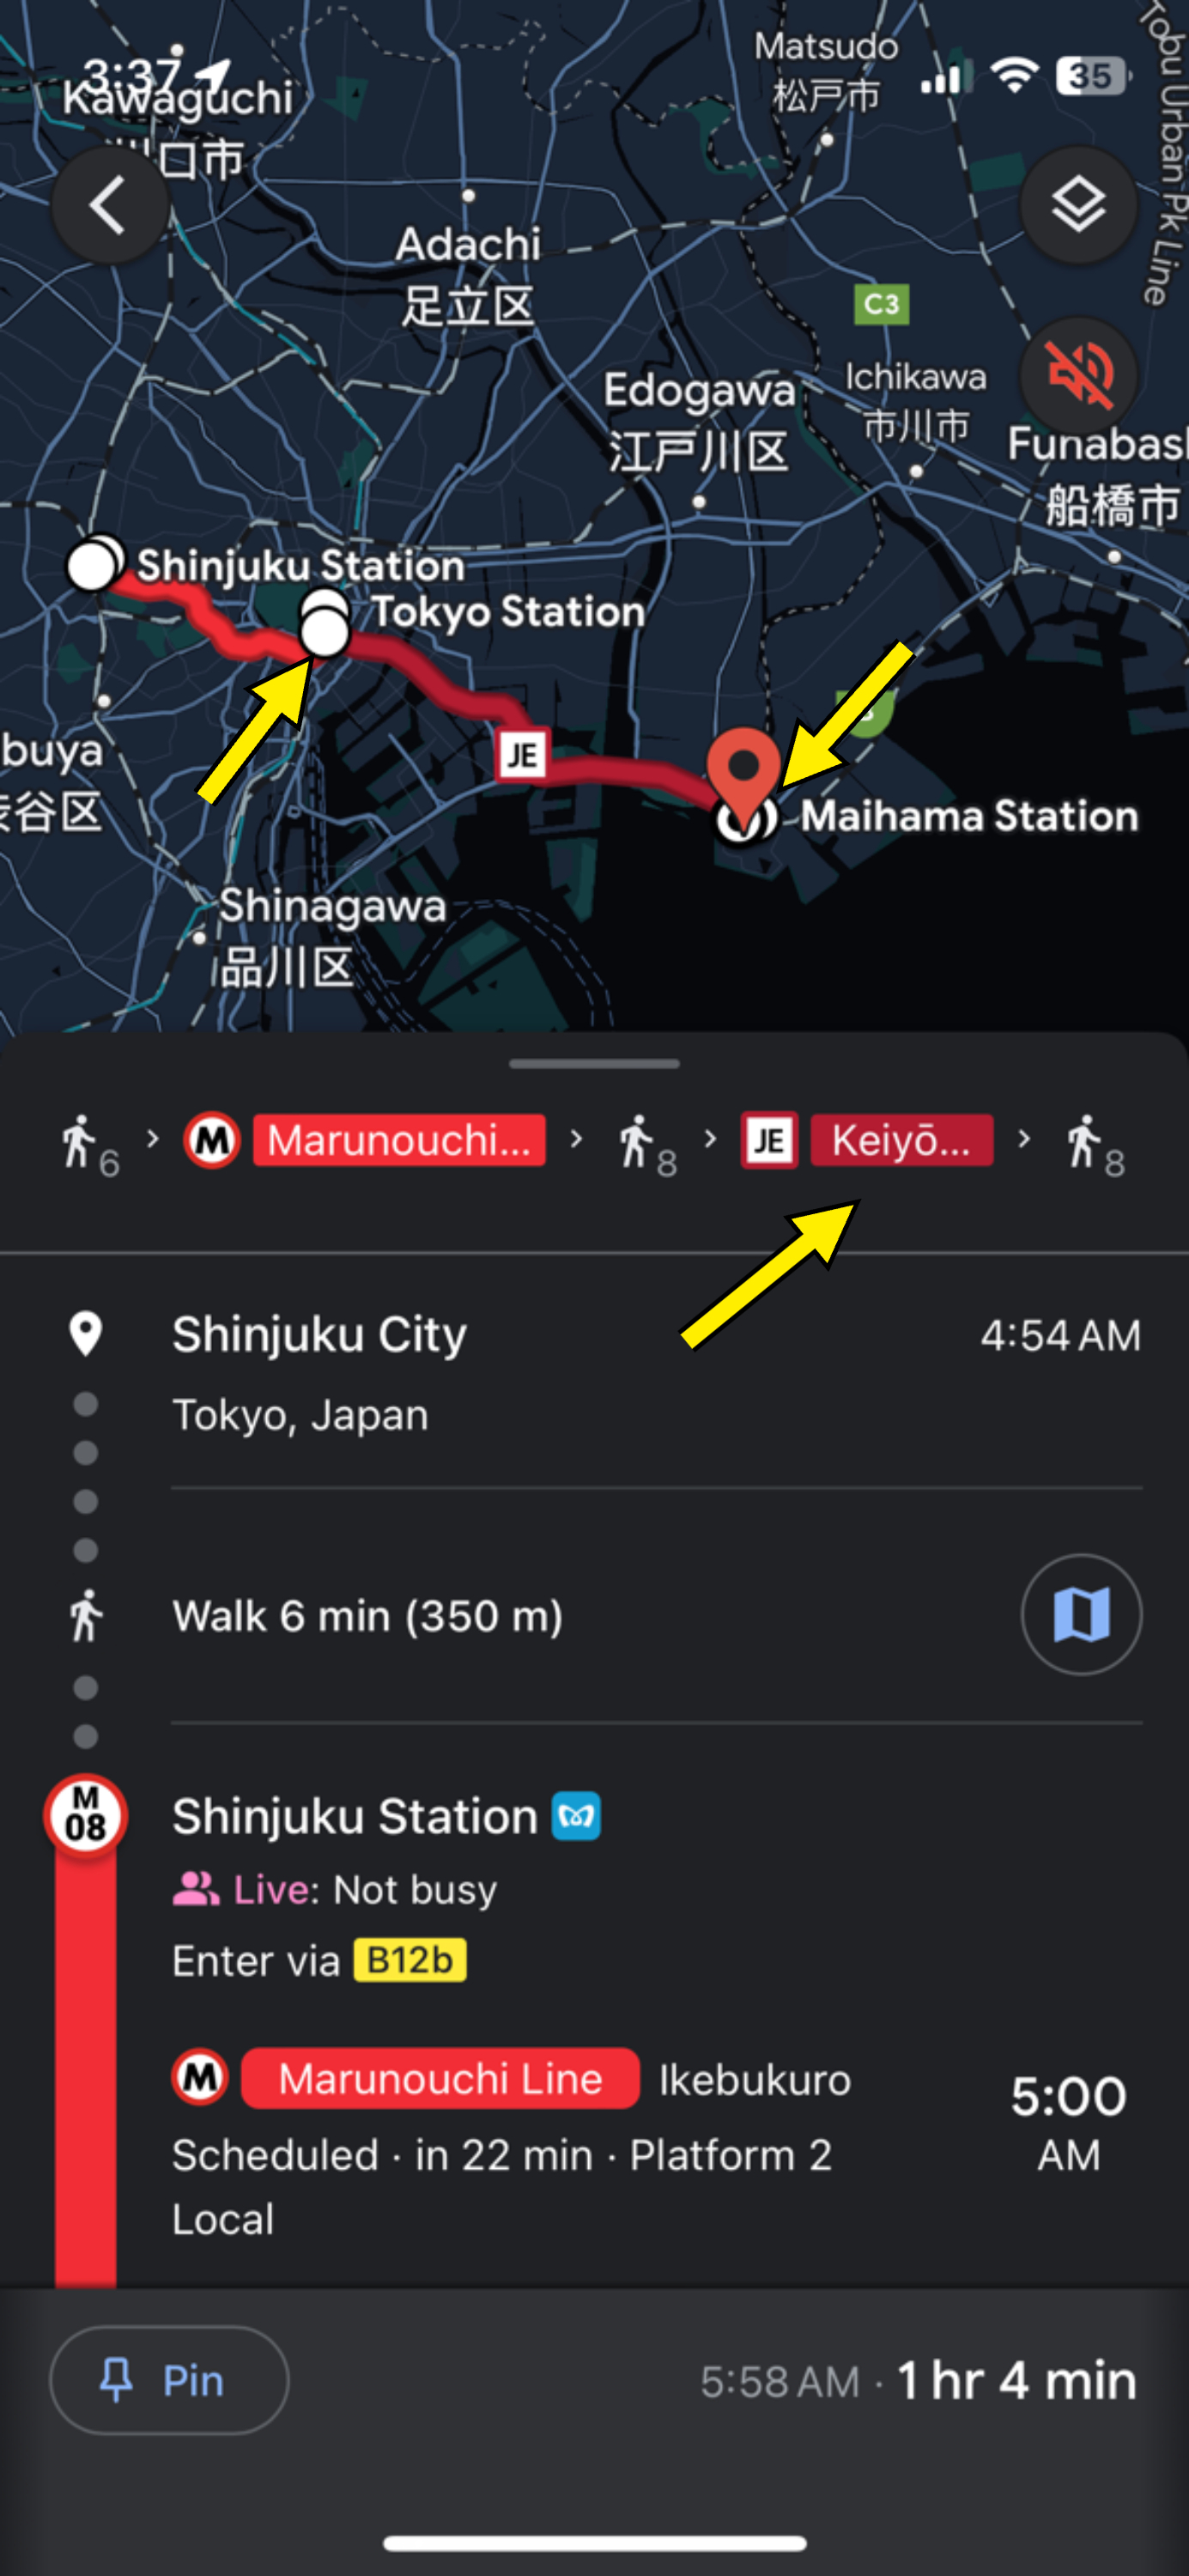 Directions from Shinjuku to Maihama Station on a mapping app, including transit options and times